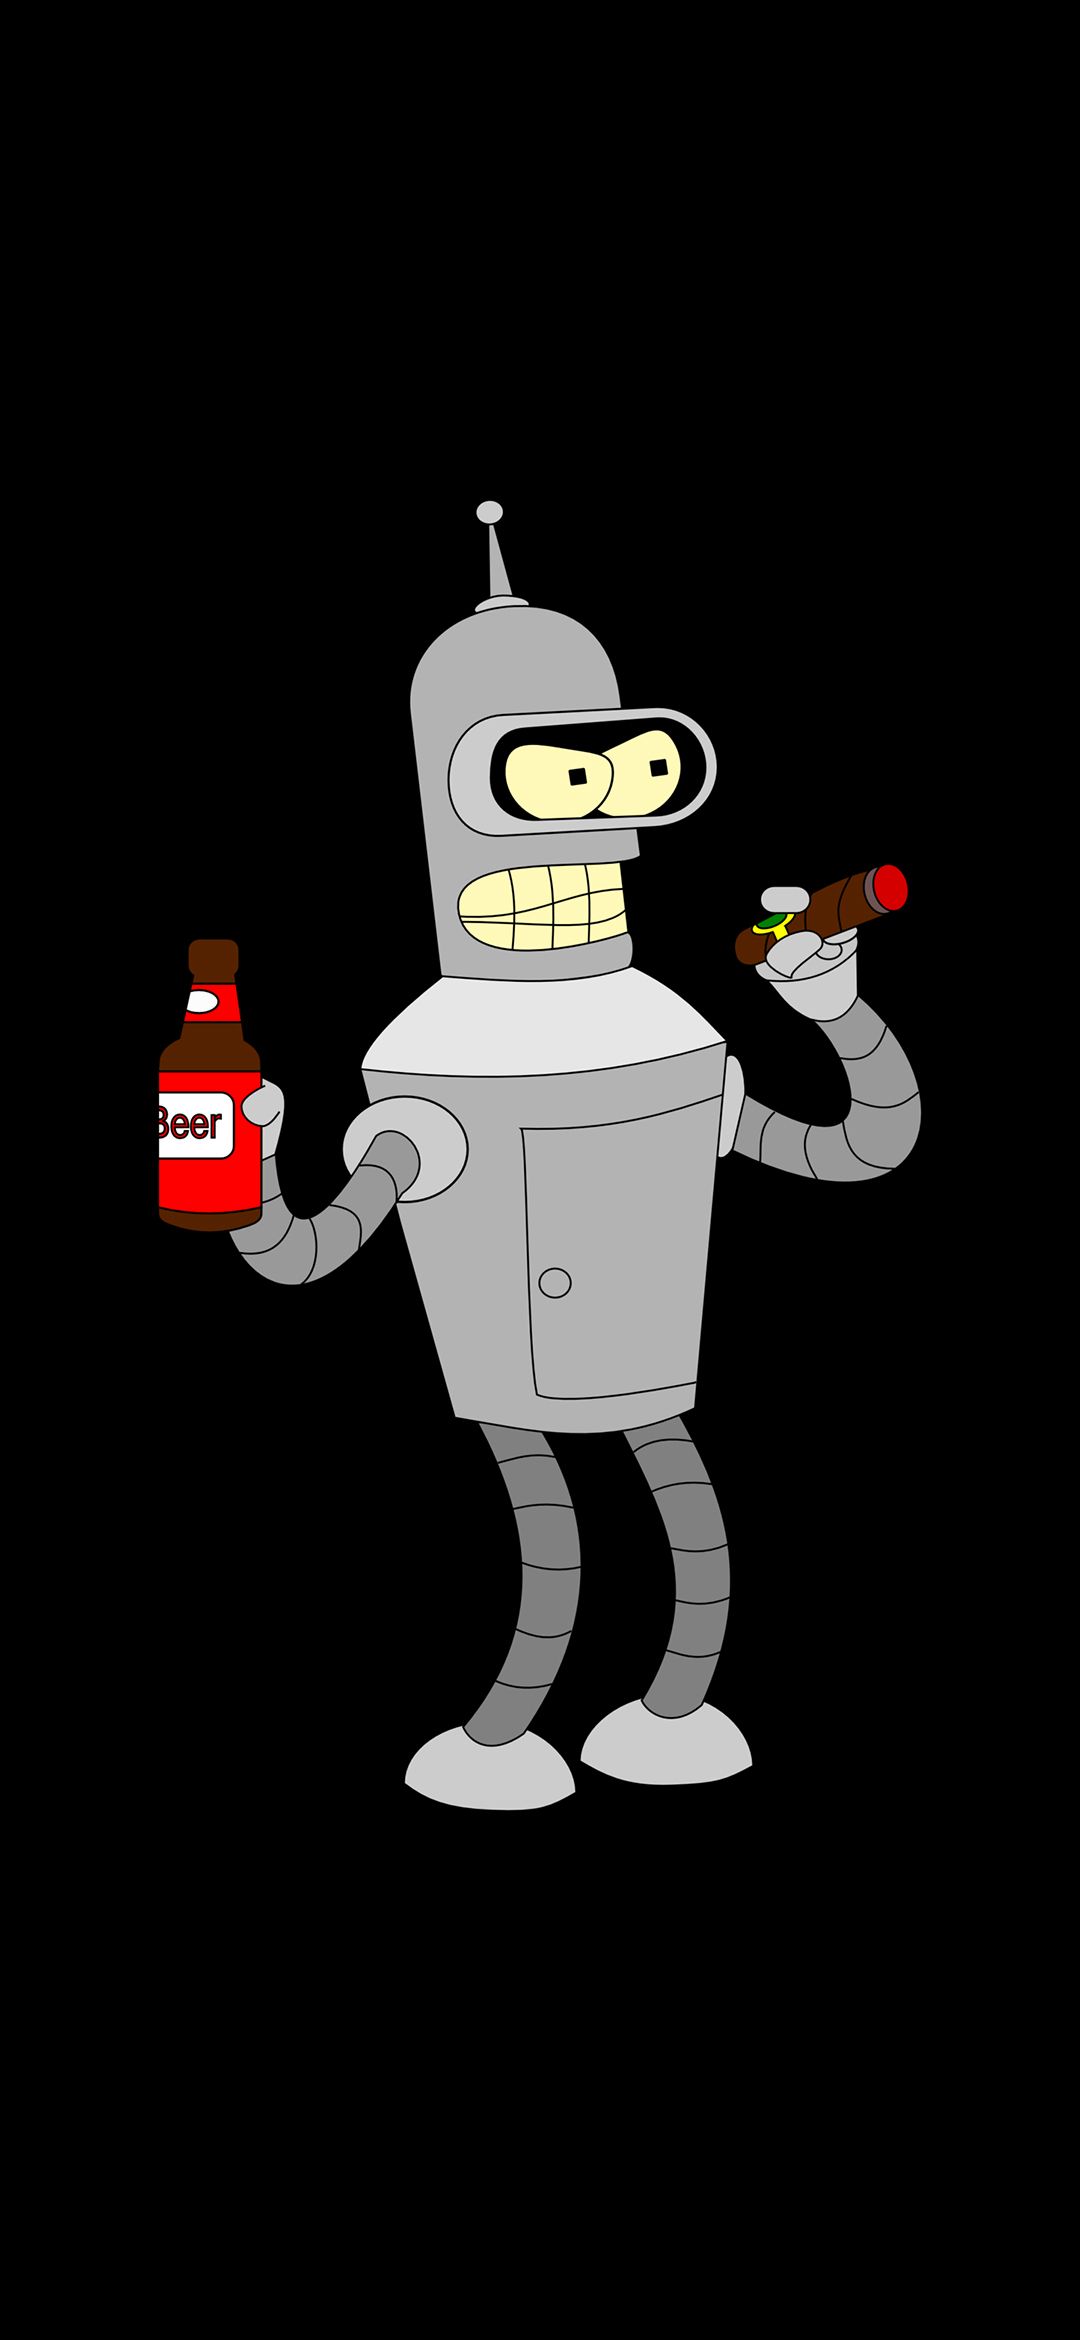 Bender from Futurama, would you like more bender wallpaper